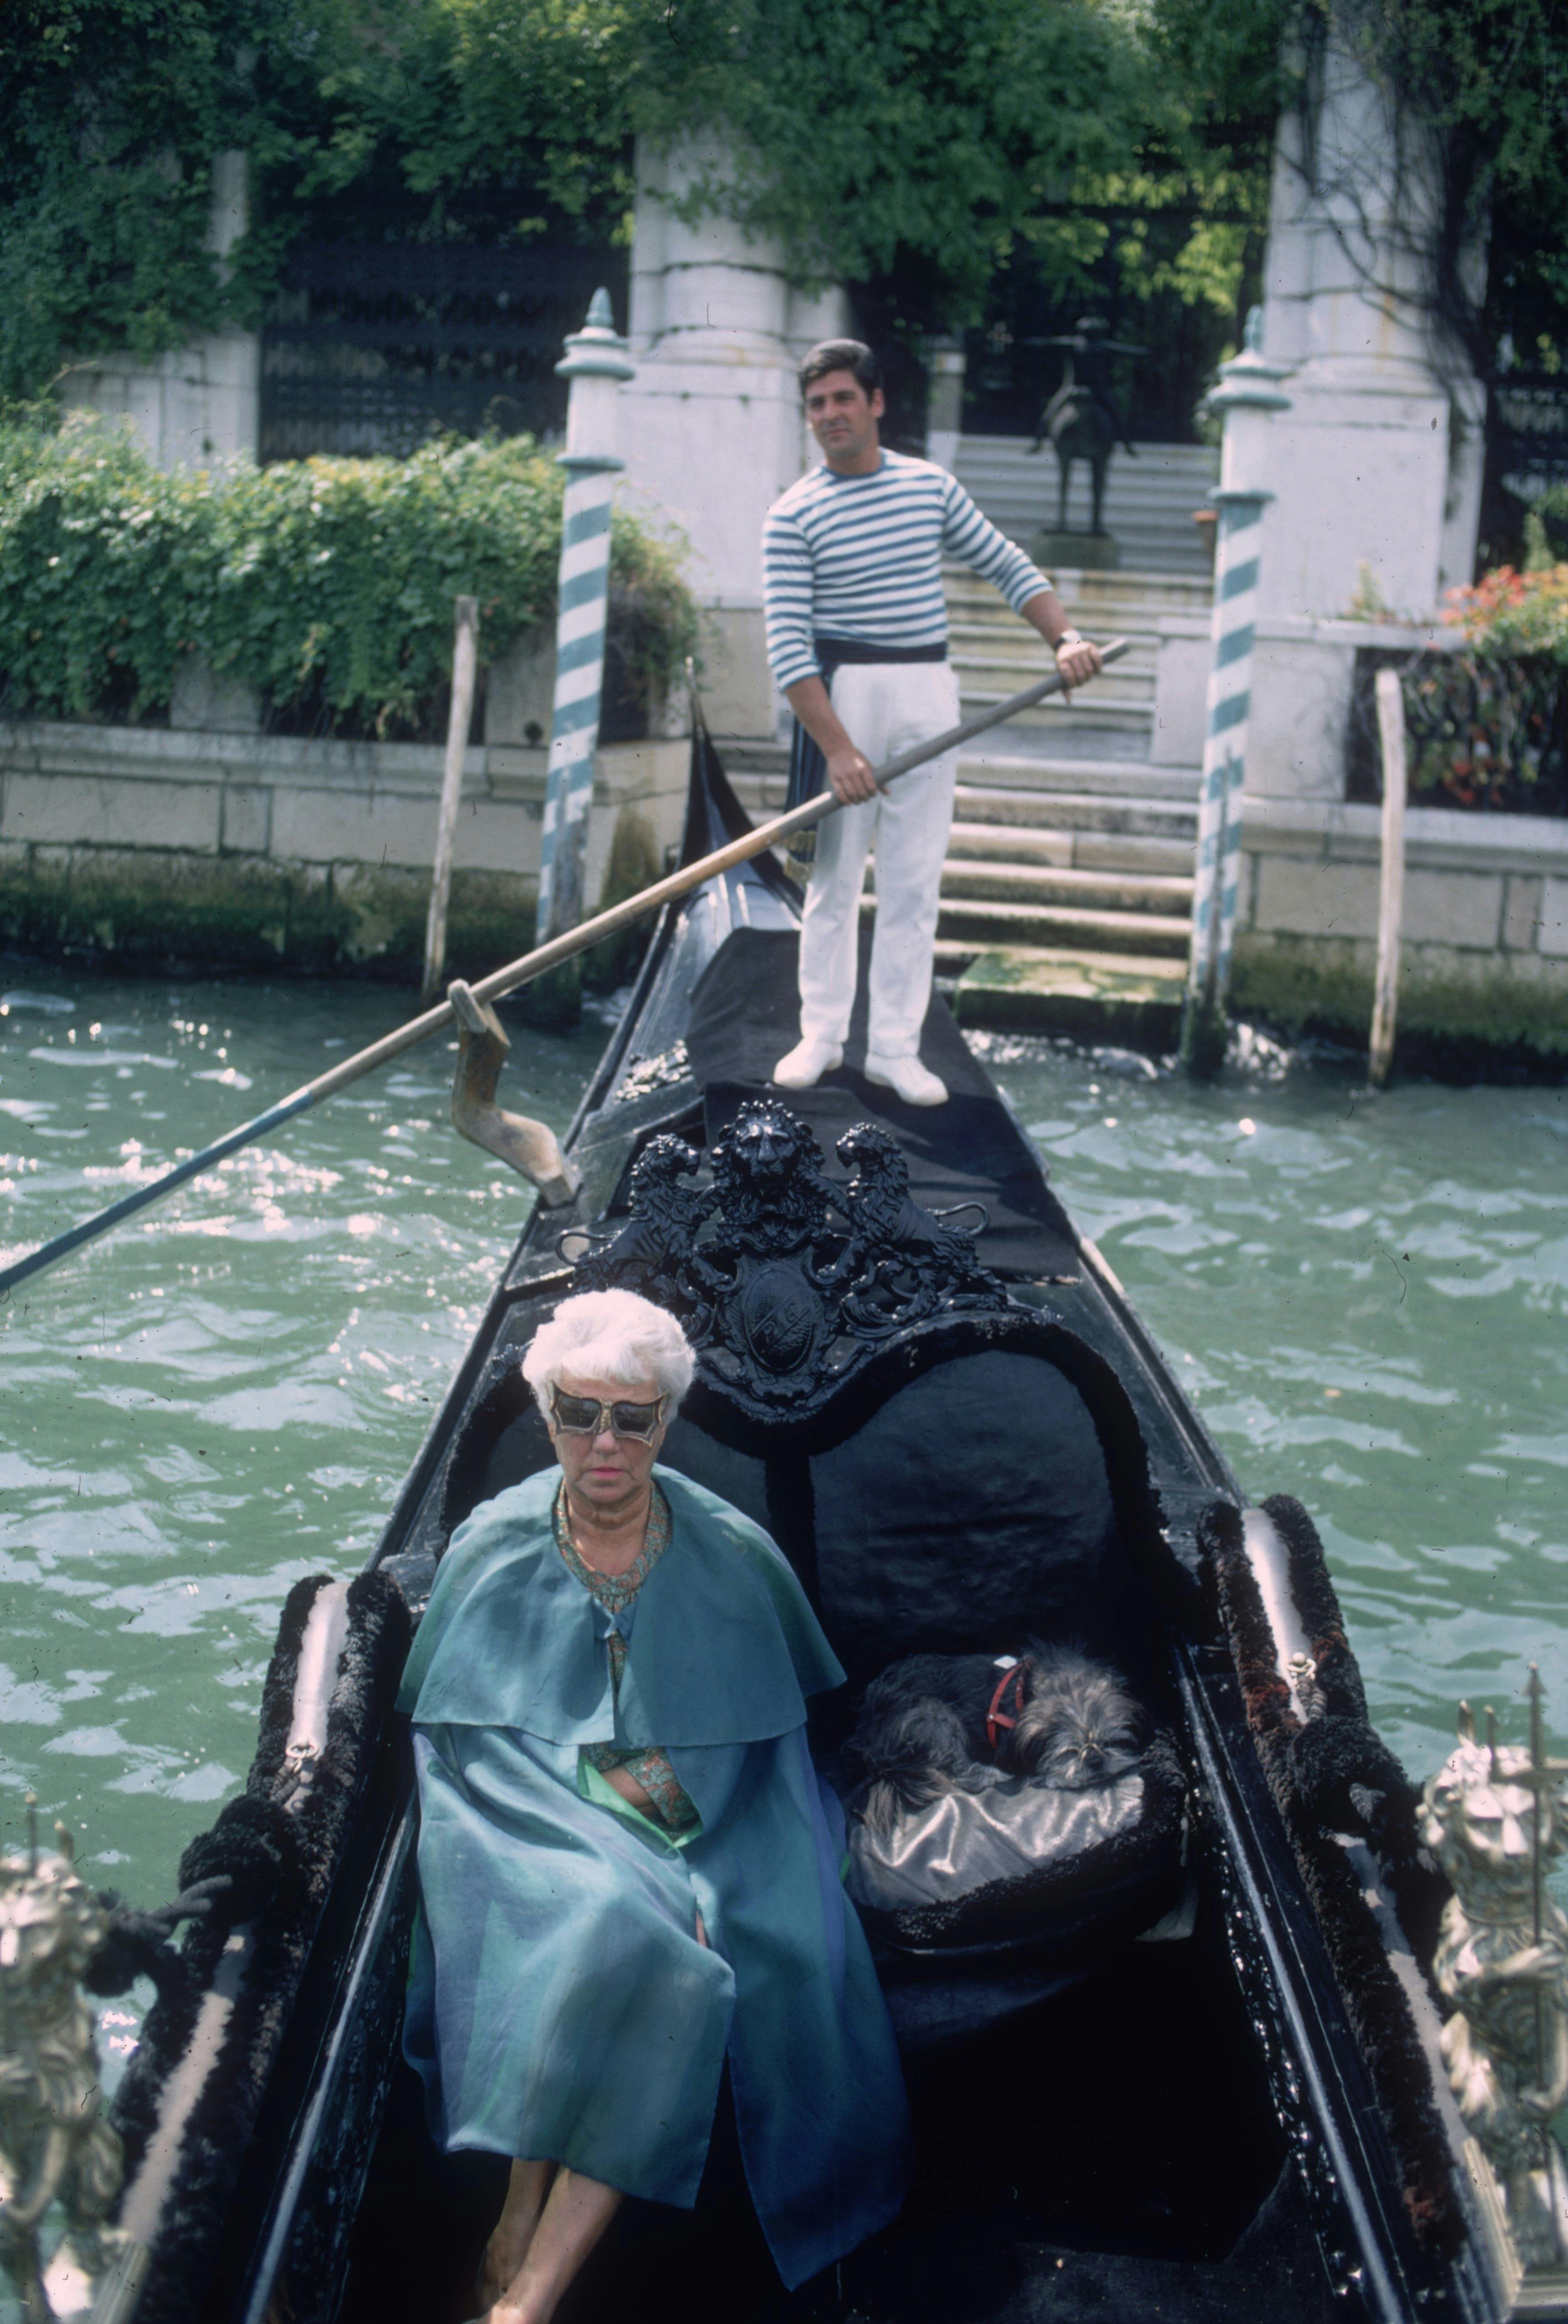 colour;format portrait;male;female;vessel;boat;personality;water transport;museums & libraries;american;europe;g2477/055 venice person human boat transportation vehicle gondola